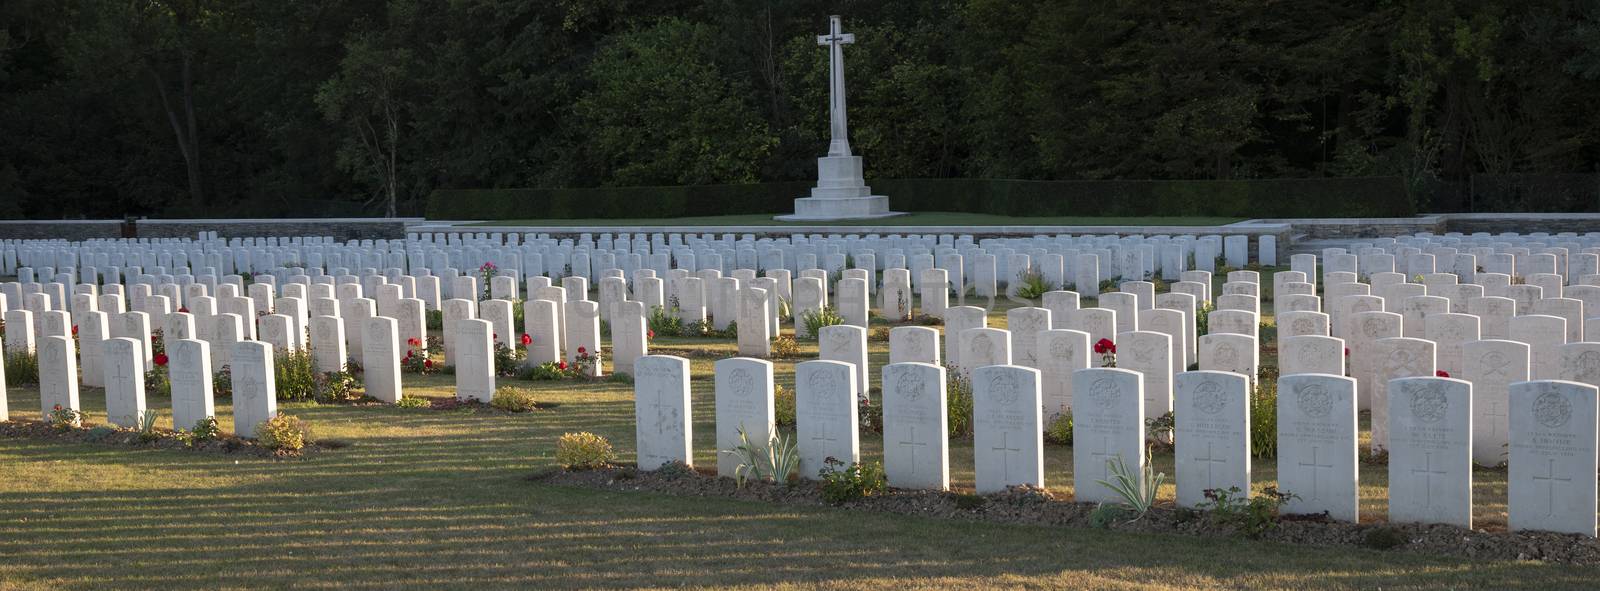 Thiepvval. France, 21 july 2020: rows of grave stones on Connaught Cemetery near Albert in France